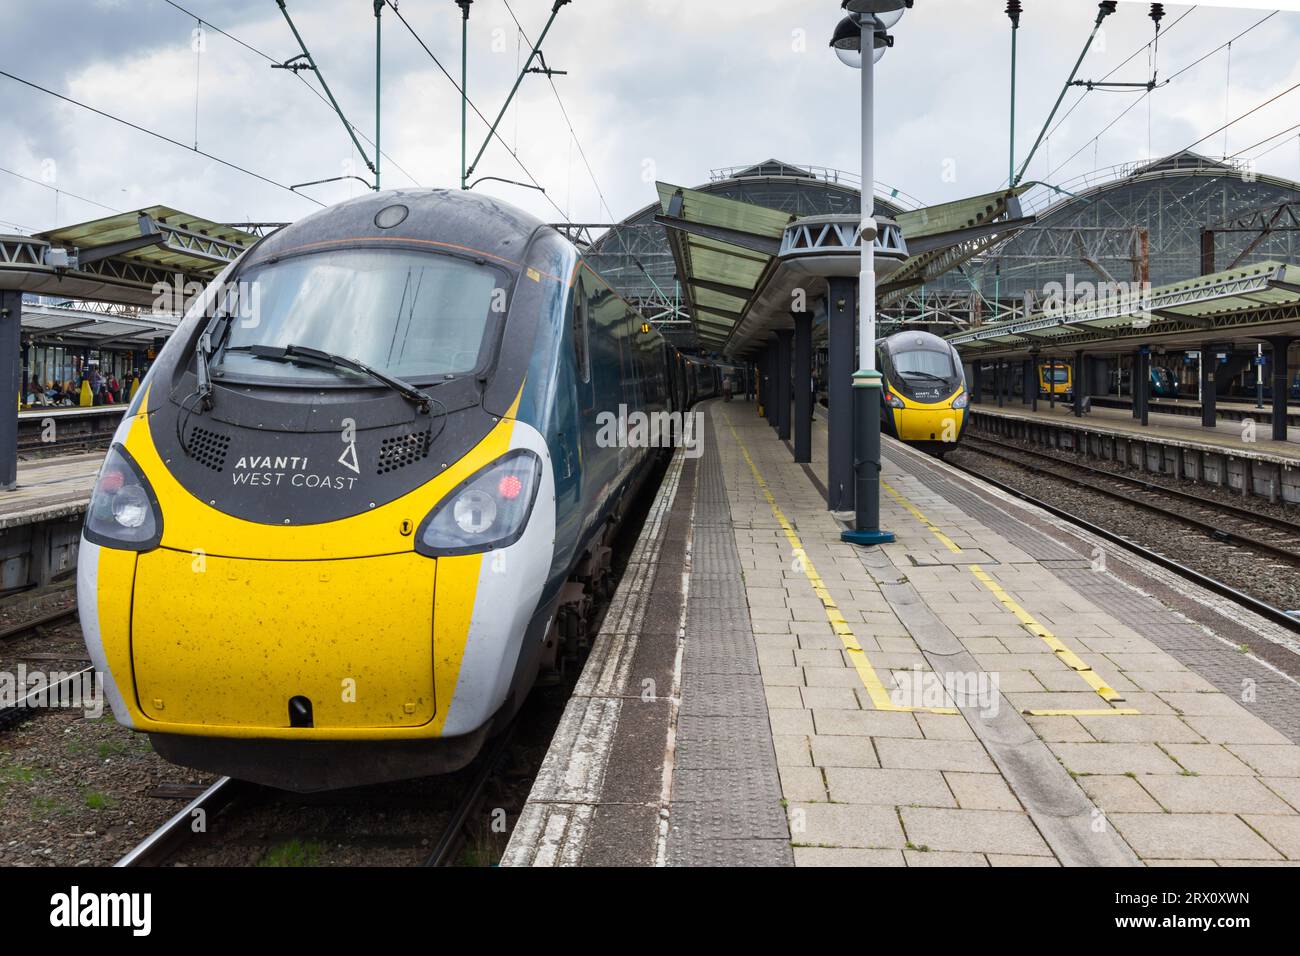 Class 390 Avanti West Coast  Pendolino tilting express passenger train  390152 at Manchester Picadilly railway station. This image has no model or pro Stock Photo